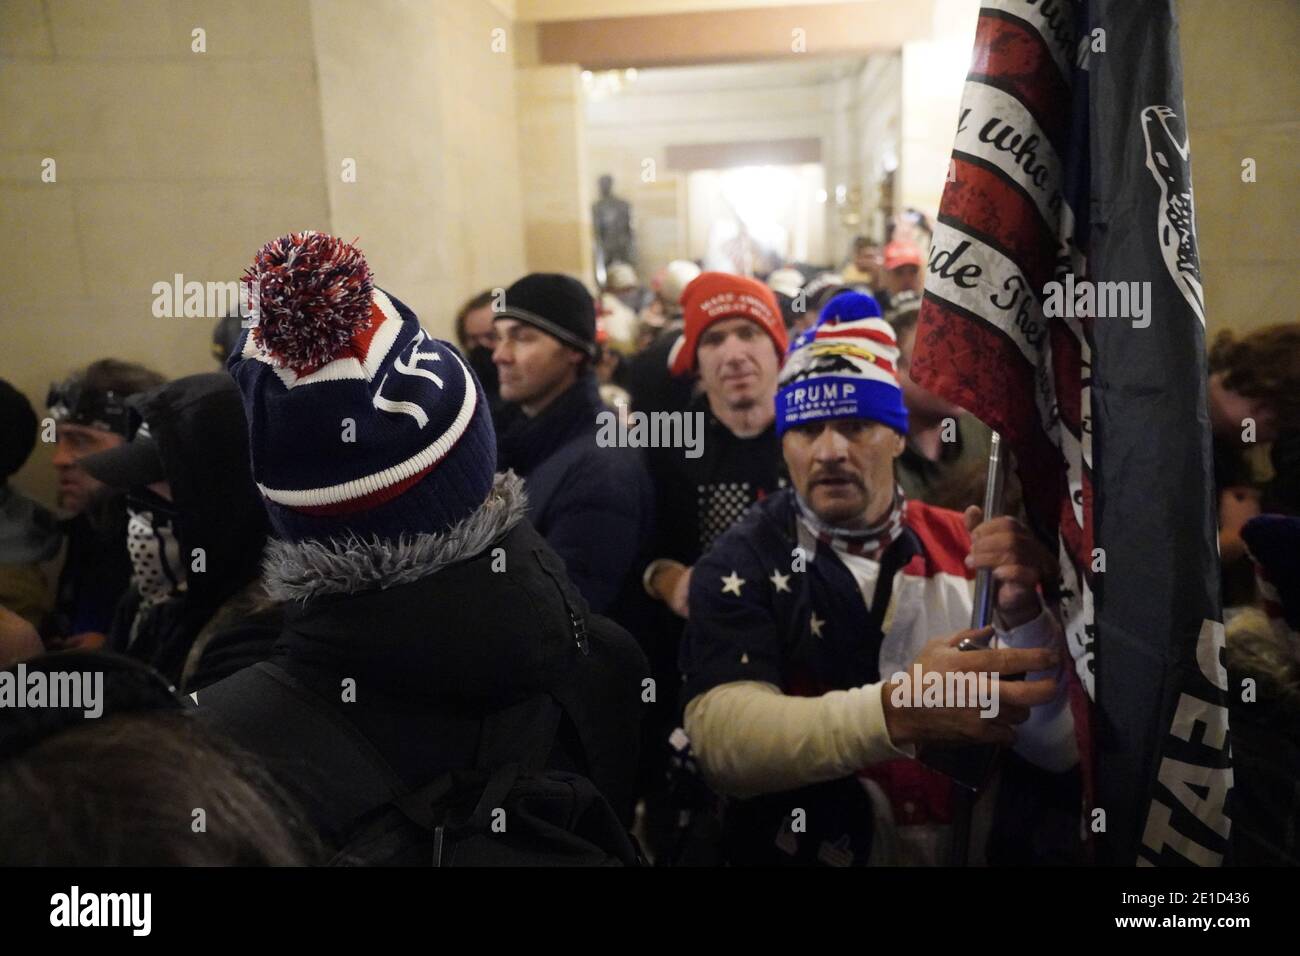 Washington, USA. 06th Jan, 2021. Protestors enter the Capitol building during a joint session of Congress in Washington, DC on Wednesday, January 6, 2021. The joint session of the House and Senate was sent to recess after the breach as it convened to confirm the Electoral College votes cast in November's election. (Photo by Chris Kleponis/Sipa USA) Credit: Sipa USA/Alamy Live News Stock Photo